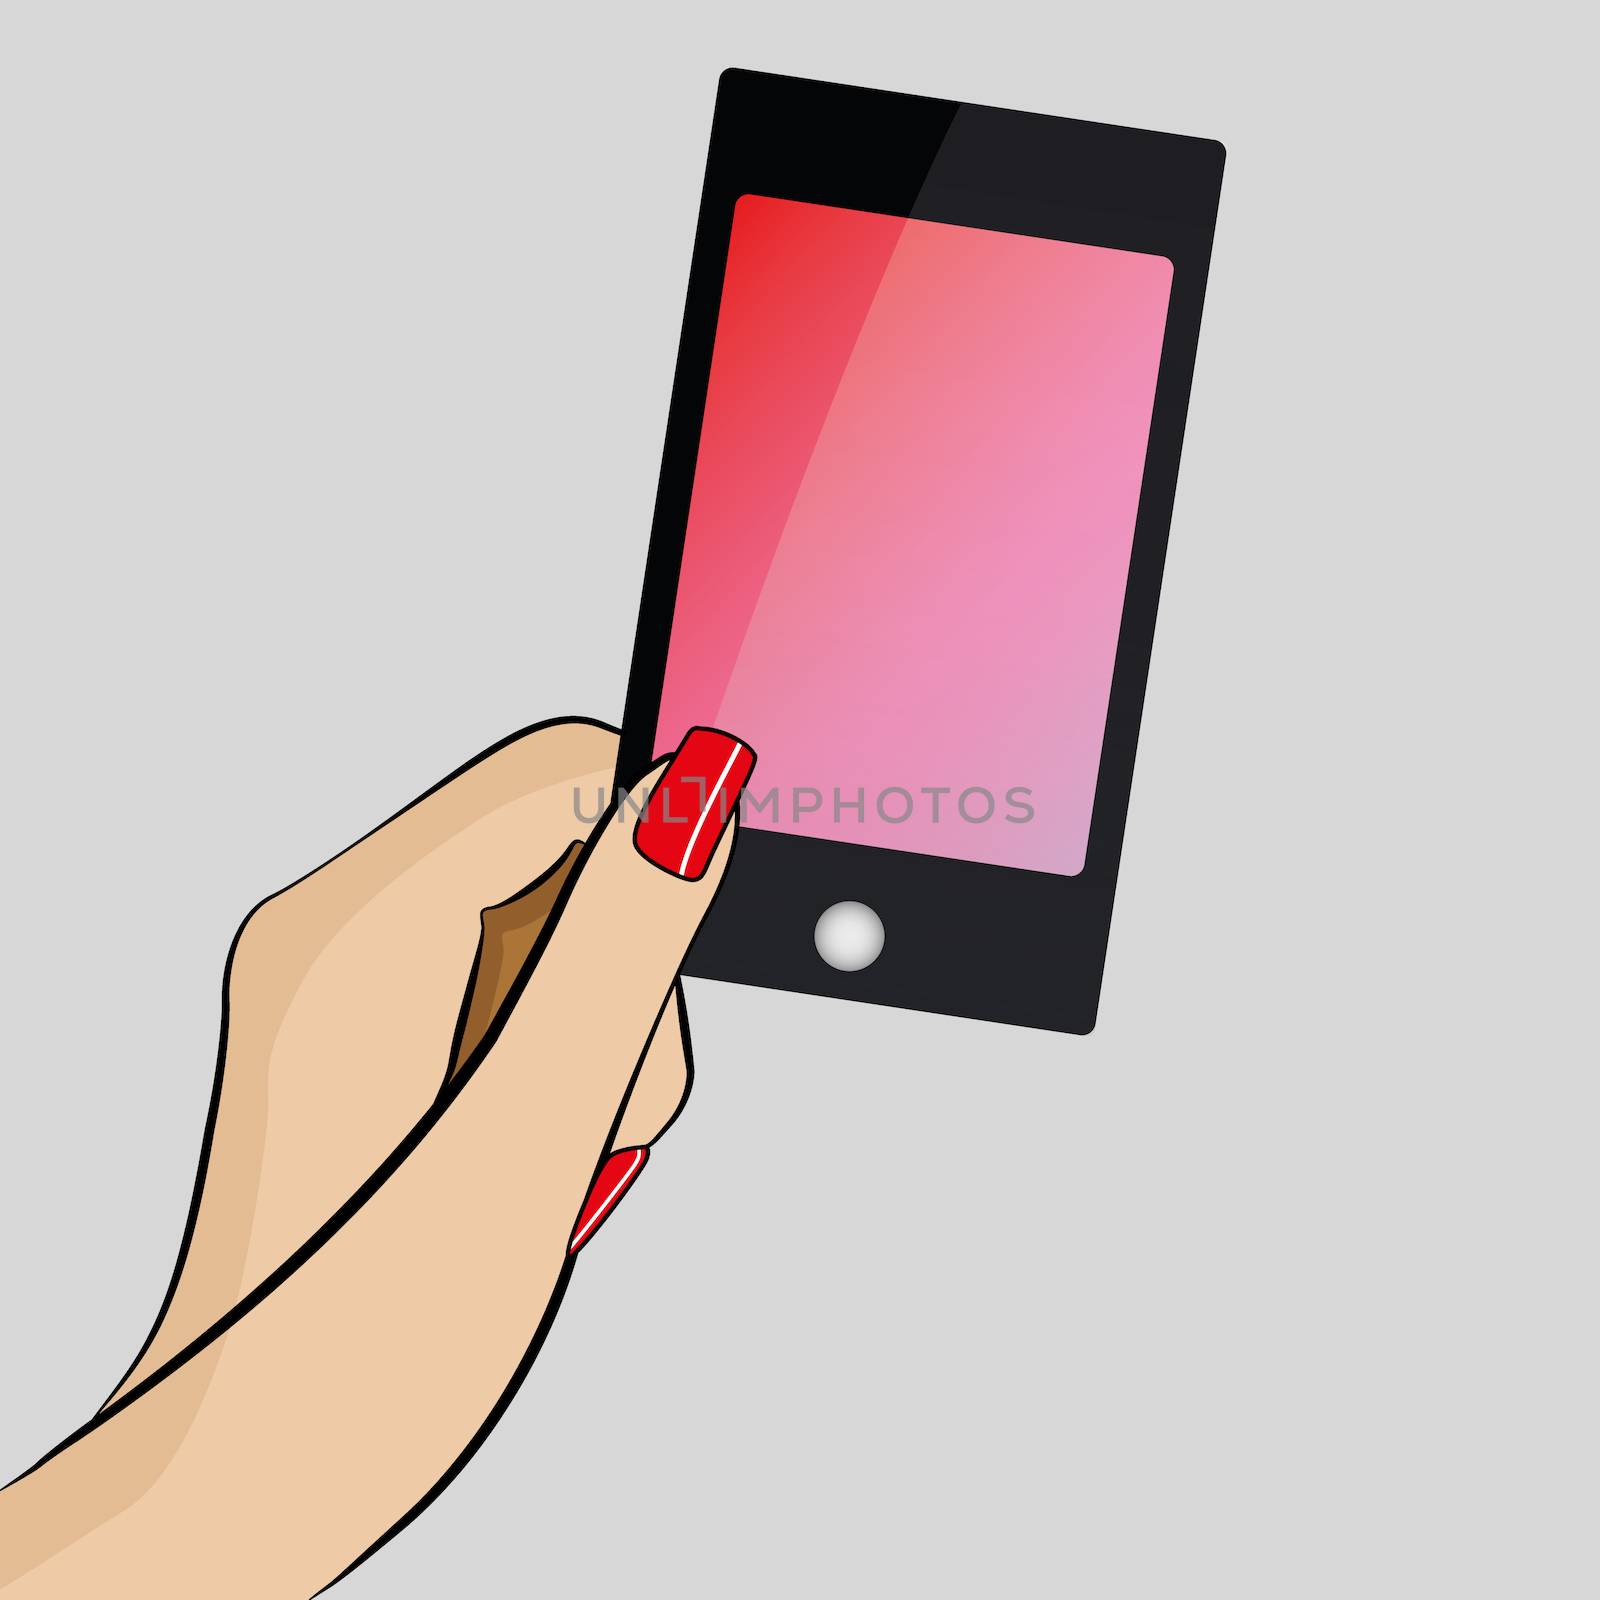 An Illustration of Womans hand holding a business card